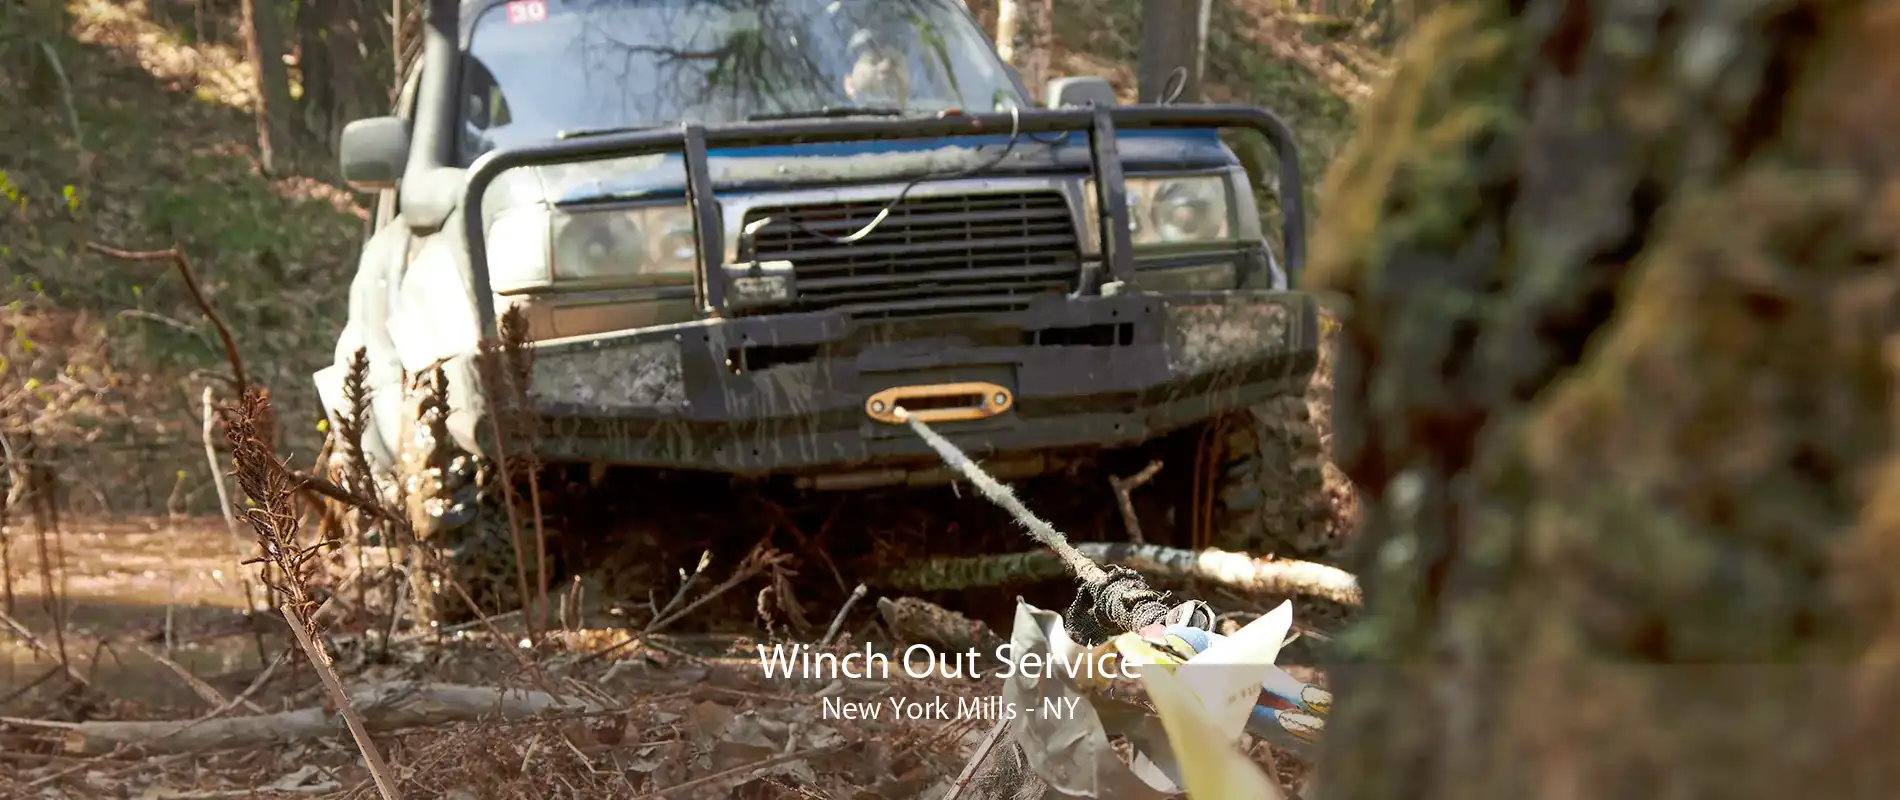 Winch Out Service New York Mills - NY